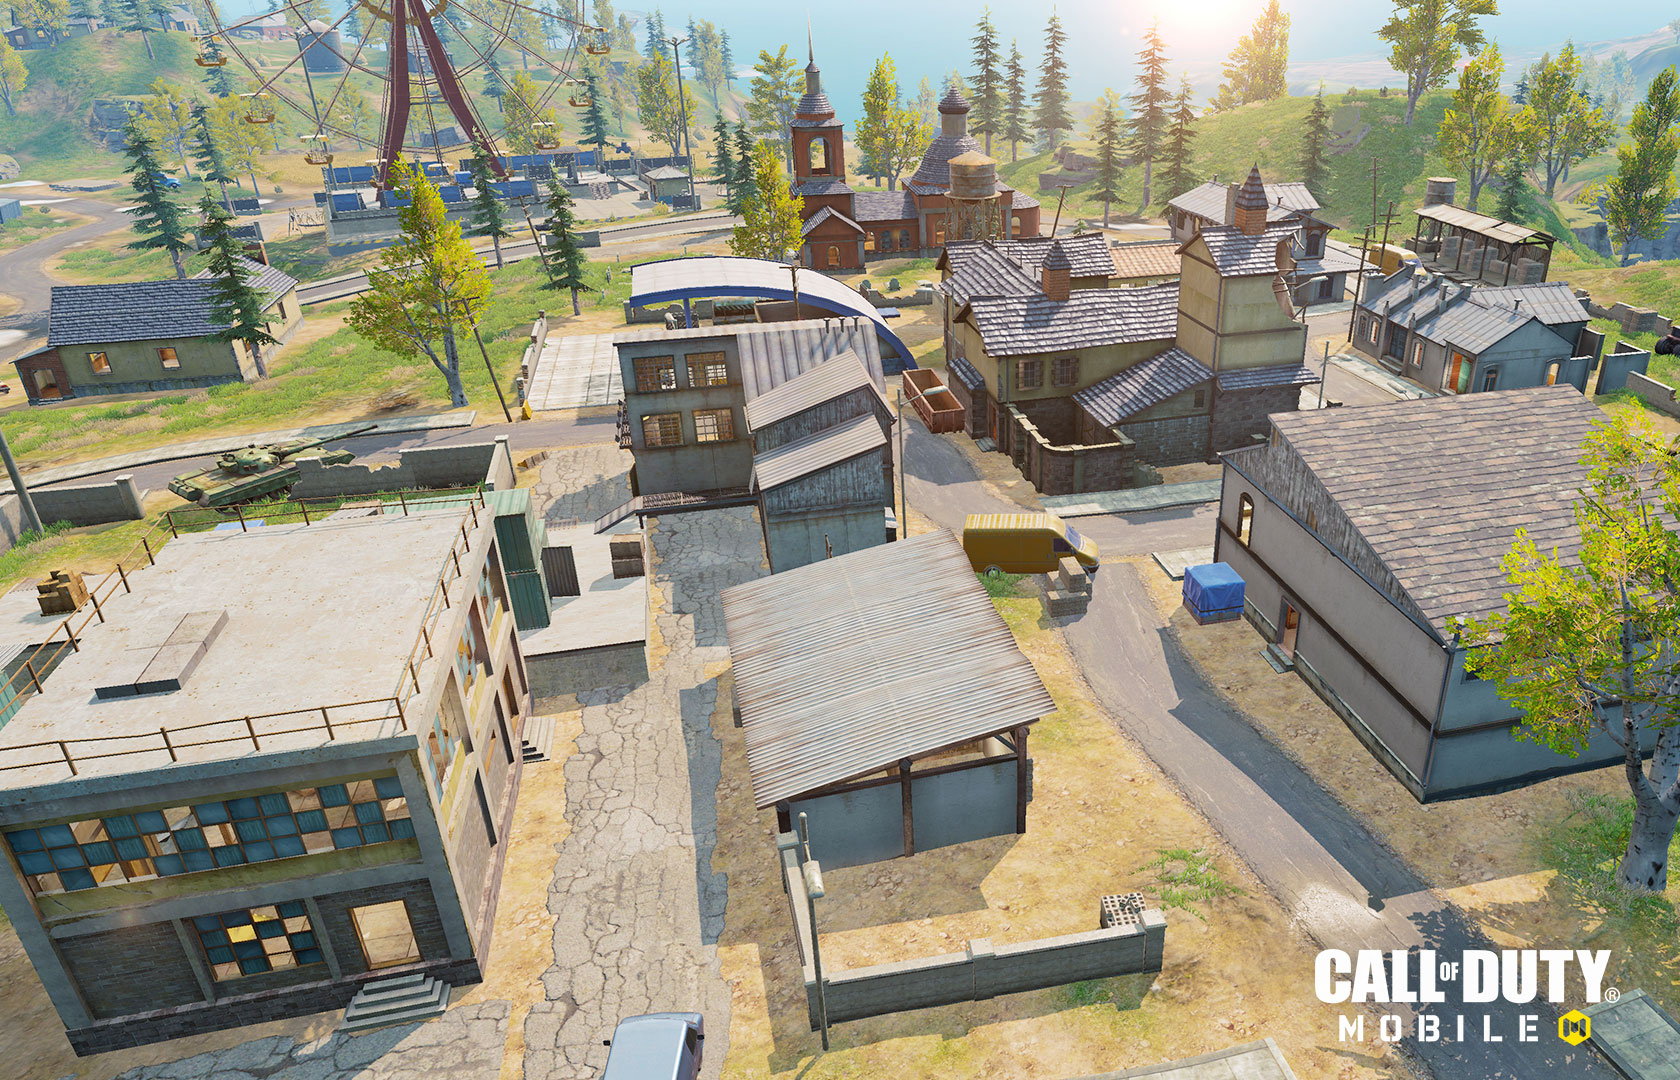 call of duty maps A Grand Tour Of The Call Of Duty Mobile Battle Royale Map Part 2